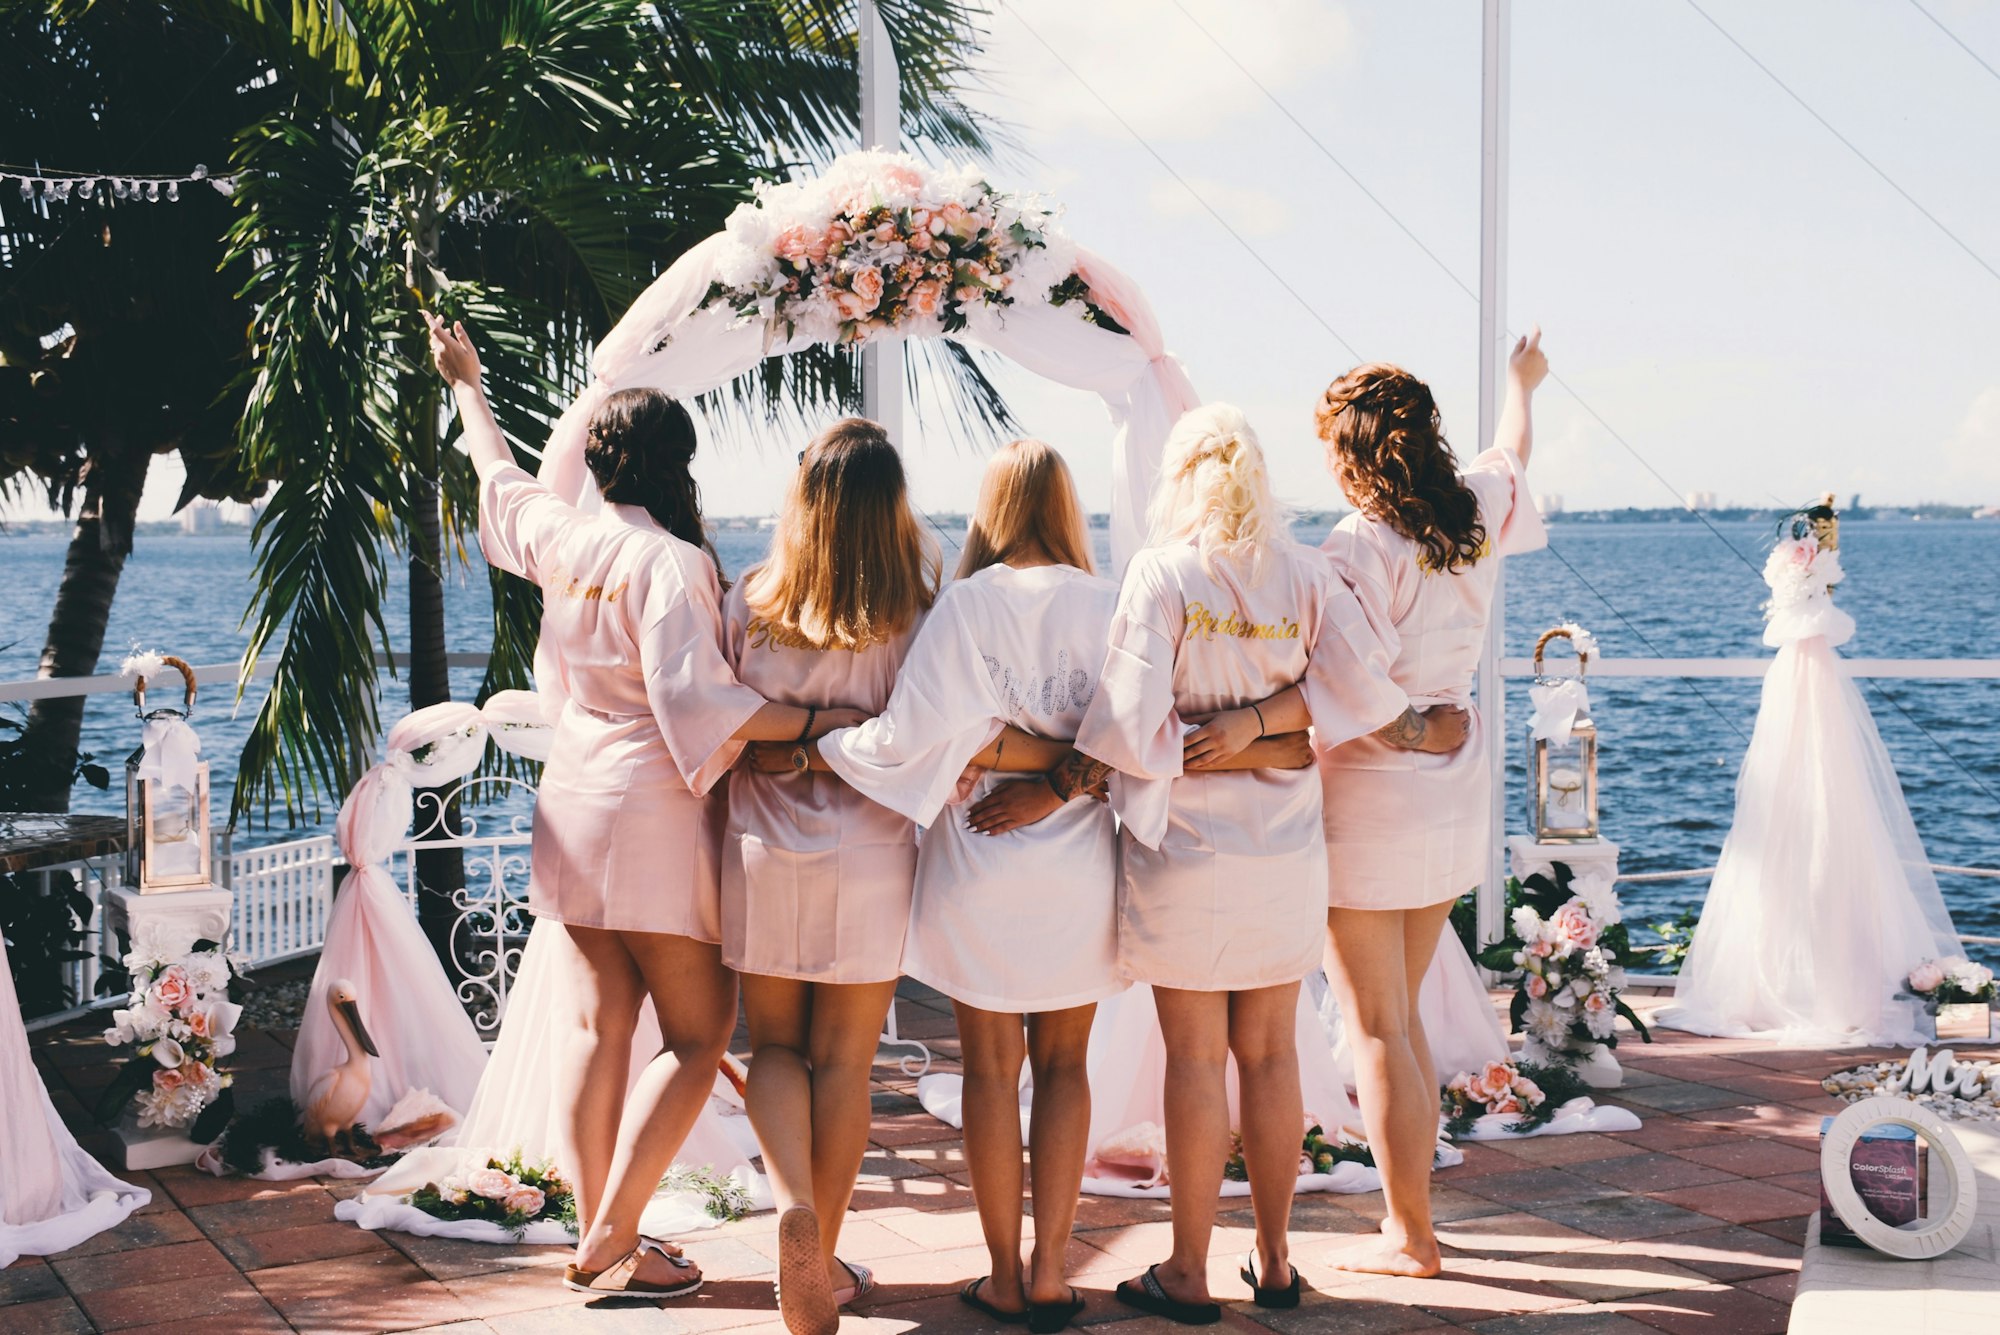 Bride surrounded by her girlfriends from behind